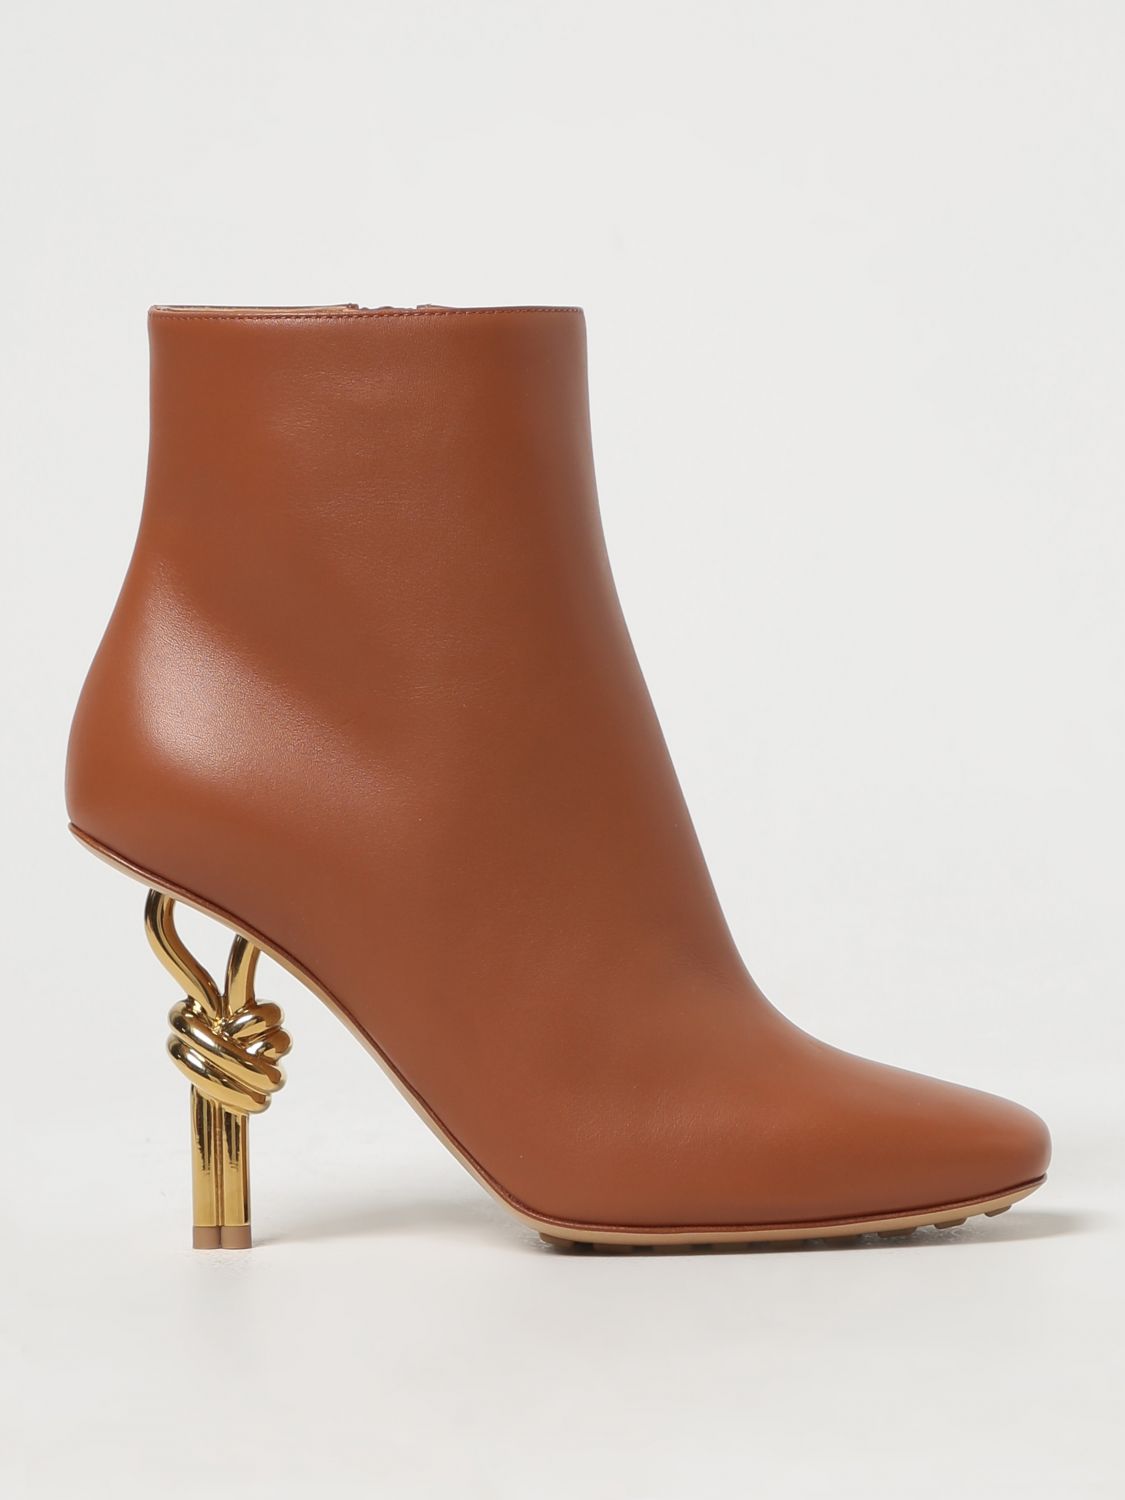 Bottega Veneta Knot Leather Heeled Ankle Boots In Brown